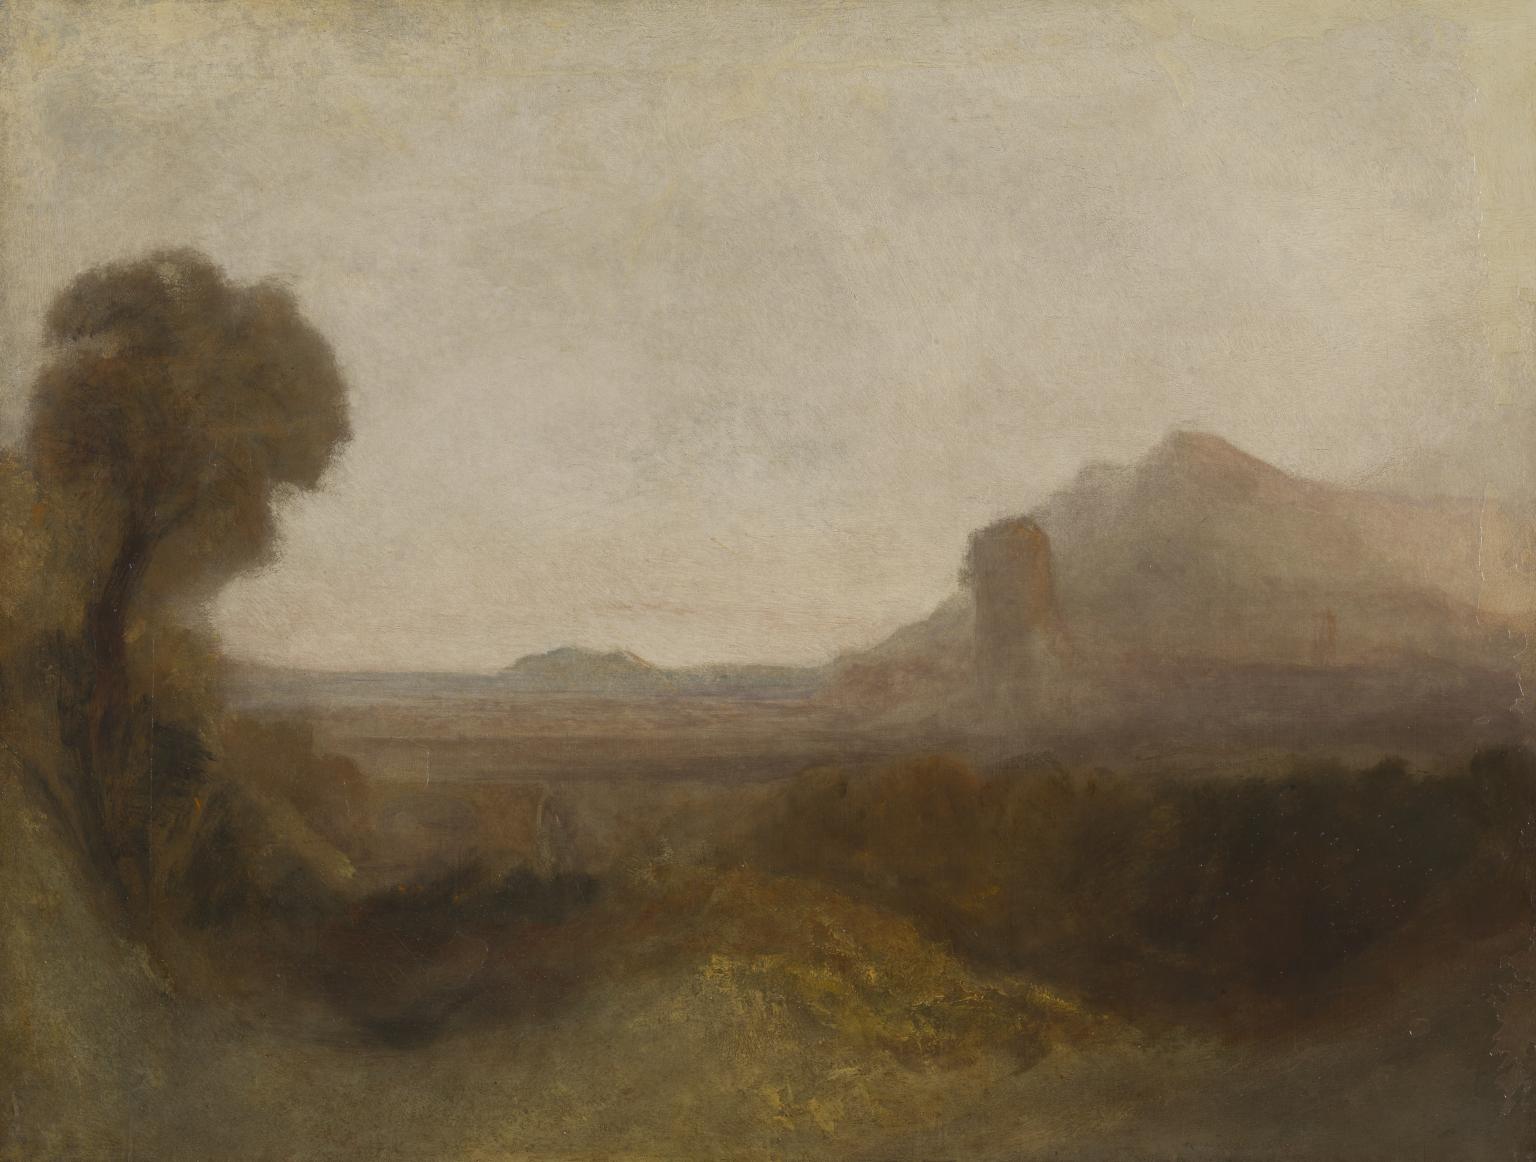 Three of a Kind: Turner Landscapes, Old Master Paintings